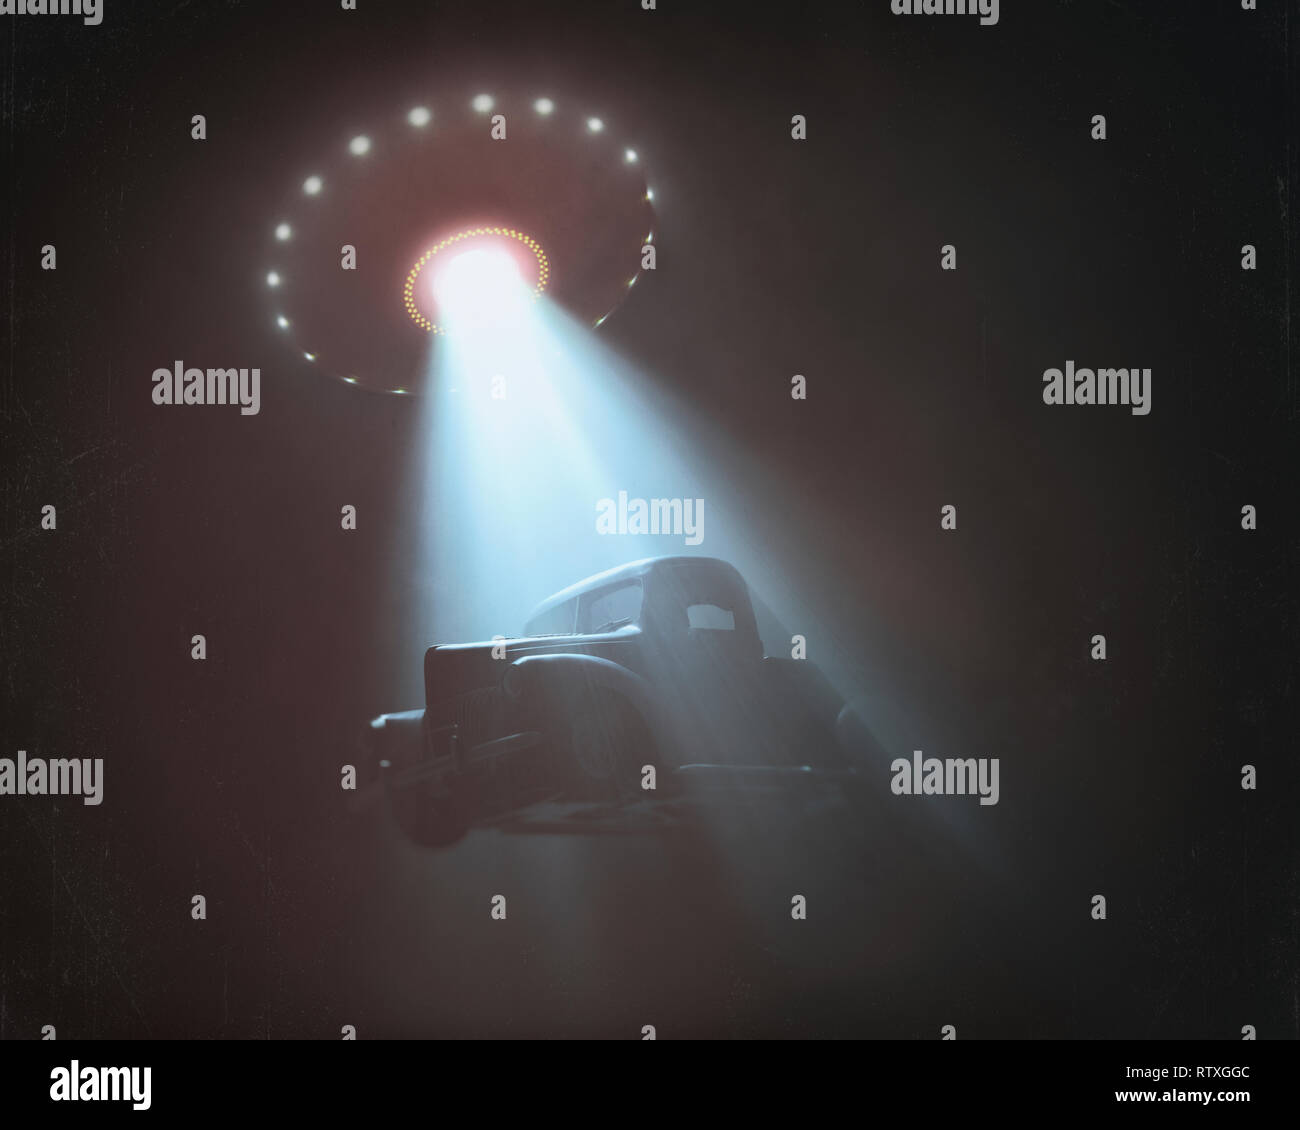 Conceptual illustration of alien abduction. Unidentified flying object (UFO) lifting a car. Stock Photo